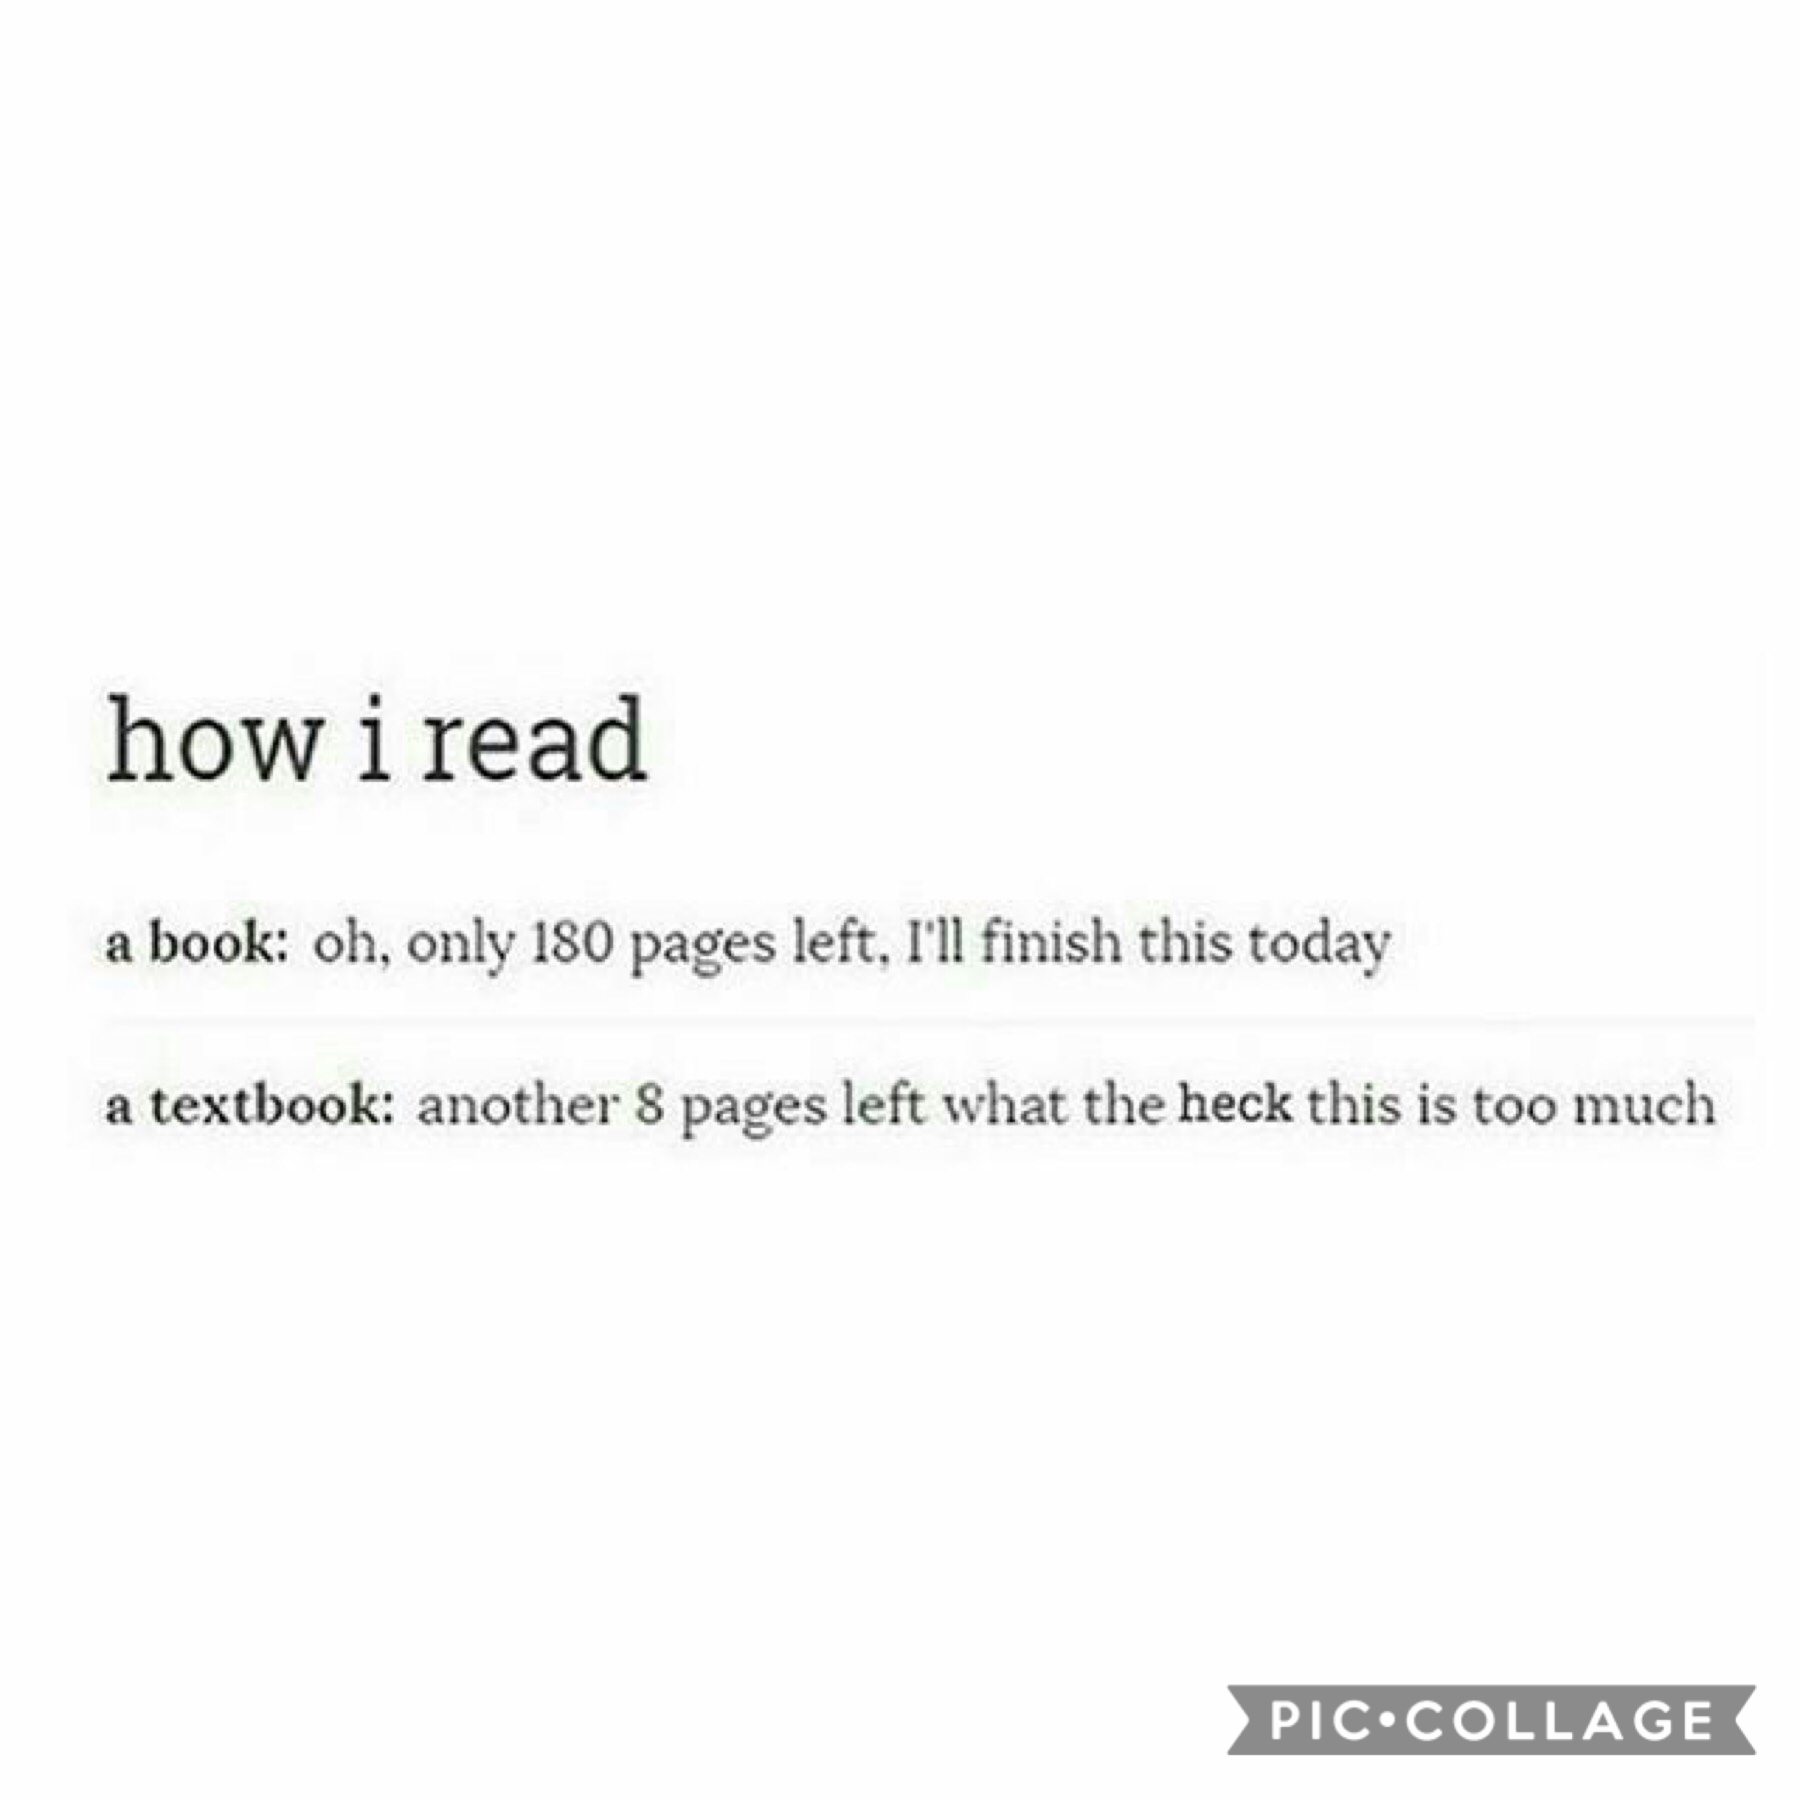 i’m sorry buT WHY IS THIS ME 😅👏🏼 honestly it takes me forever to read textbook pages but when I read my own book I’m telling you I go through it in matter of secoNDS 